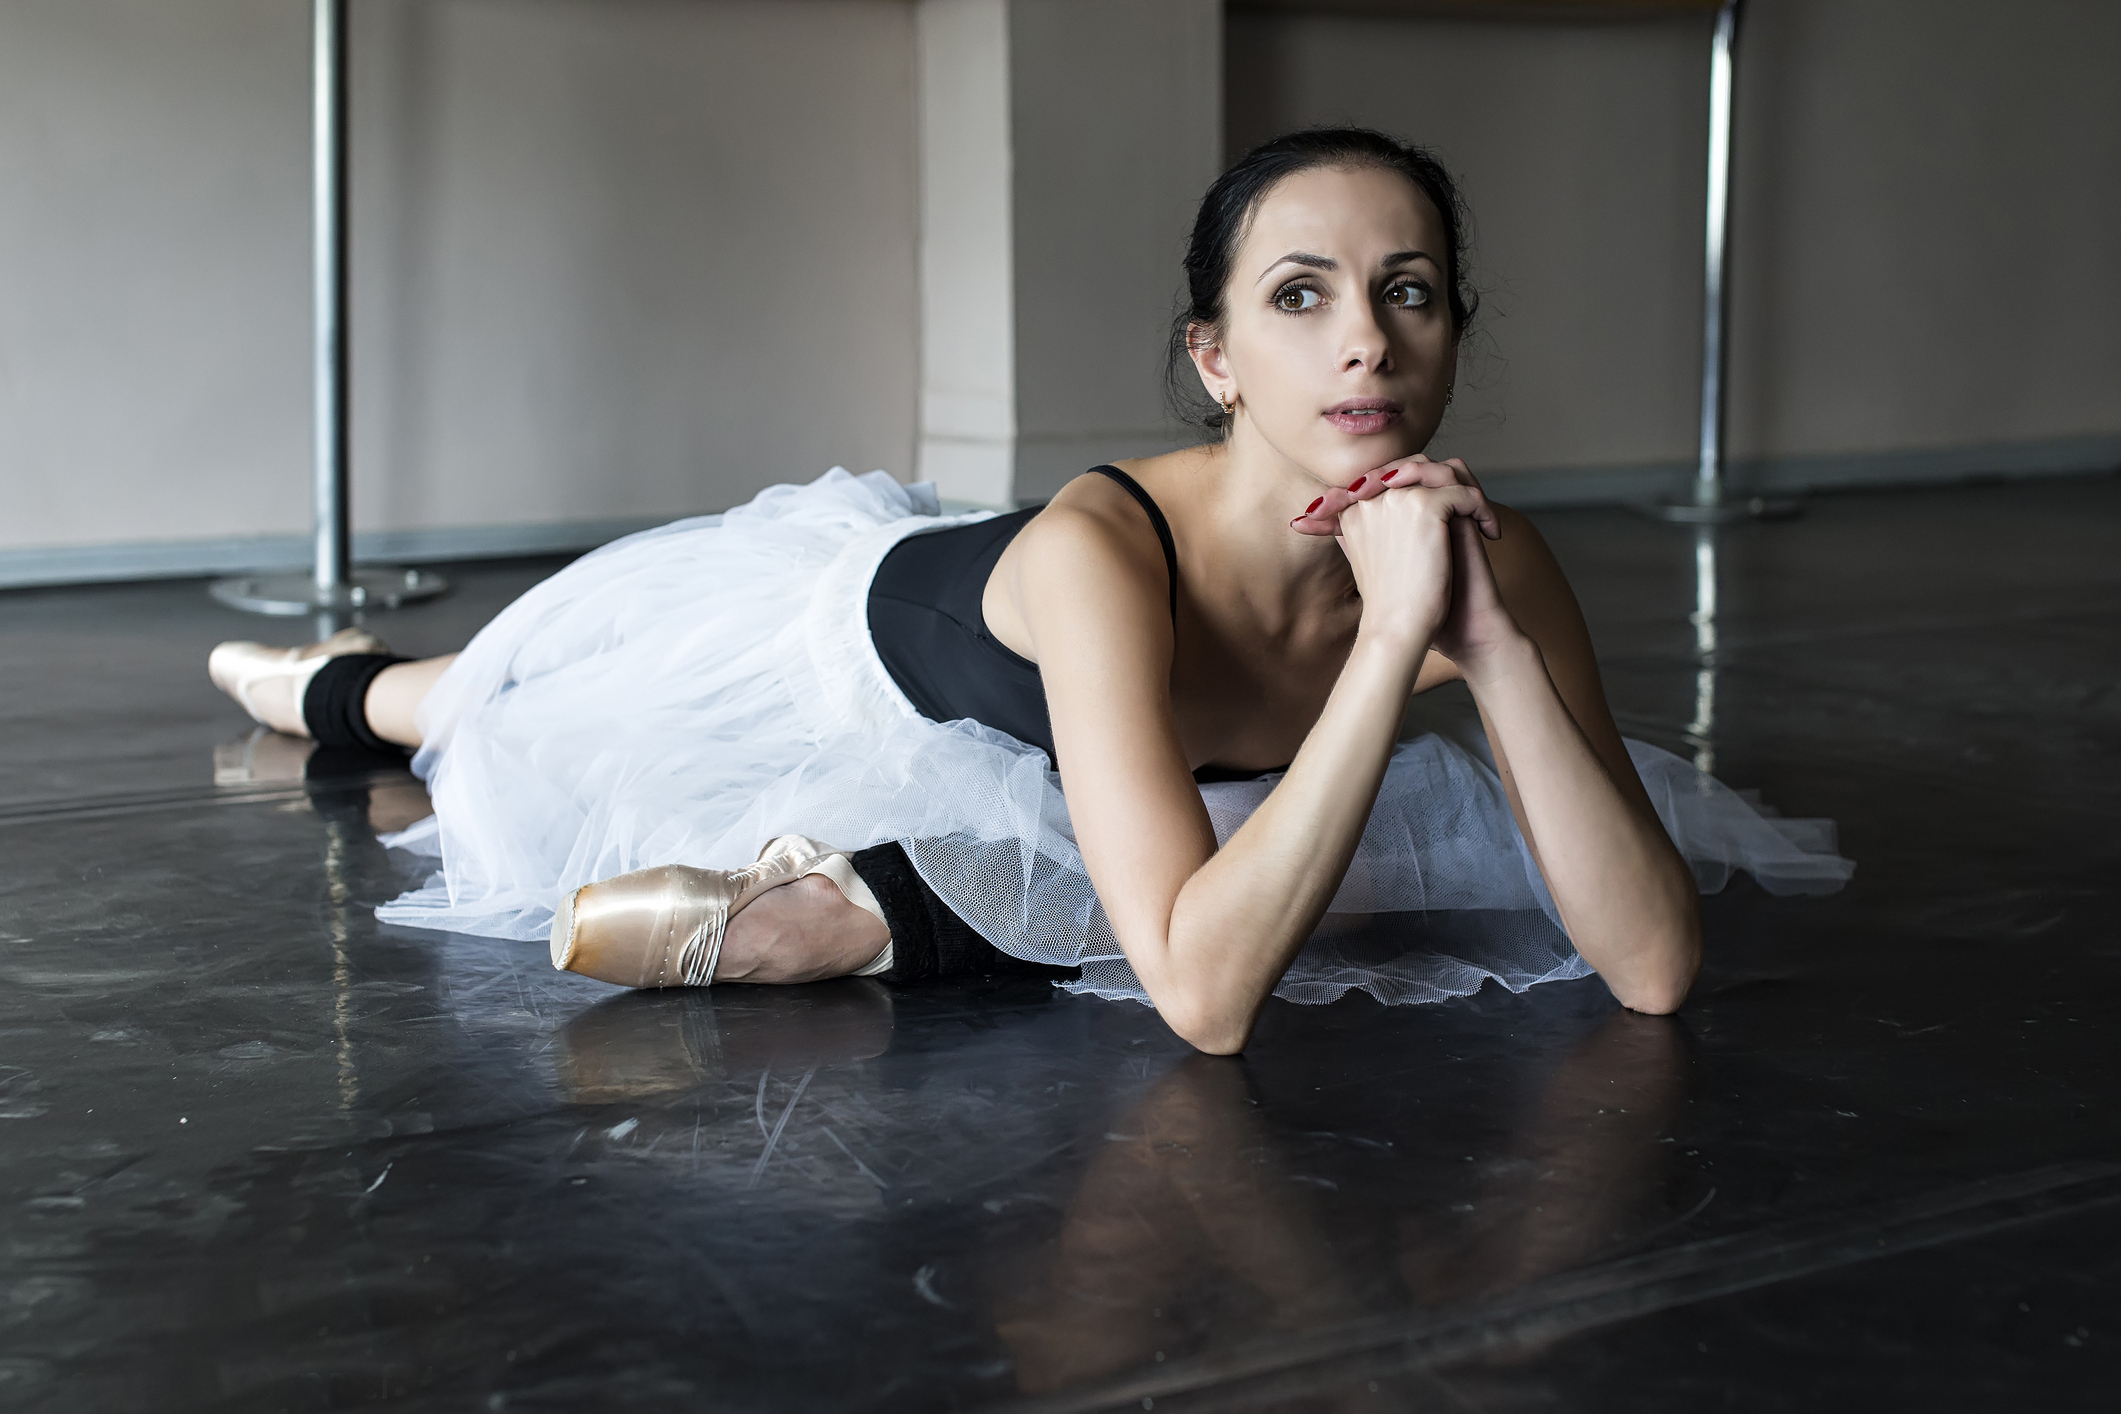 A ballerina in a black camisole leotard and white practice romantic tutu, in pointe shoes, stretches on the floor of a ballet studio with a pondering look on her face. She rests her chin on her hands, which are folded together.